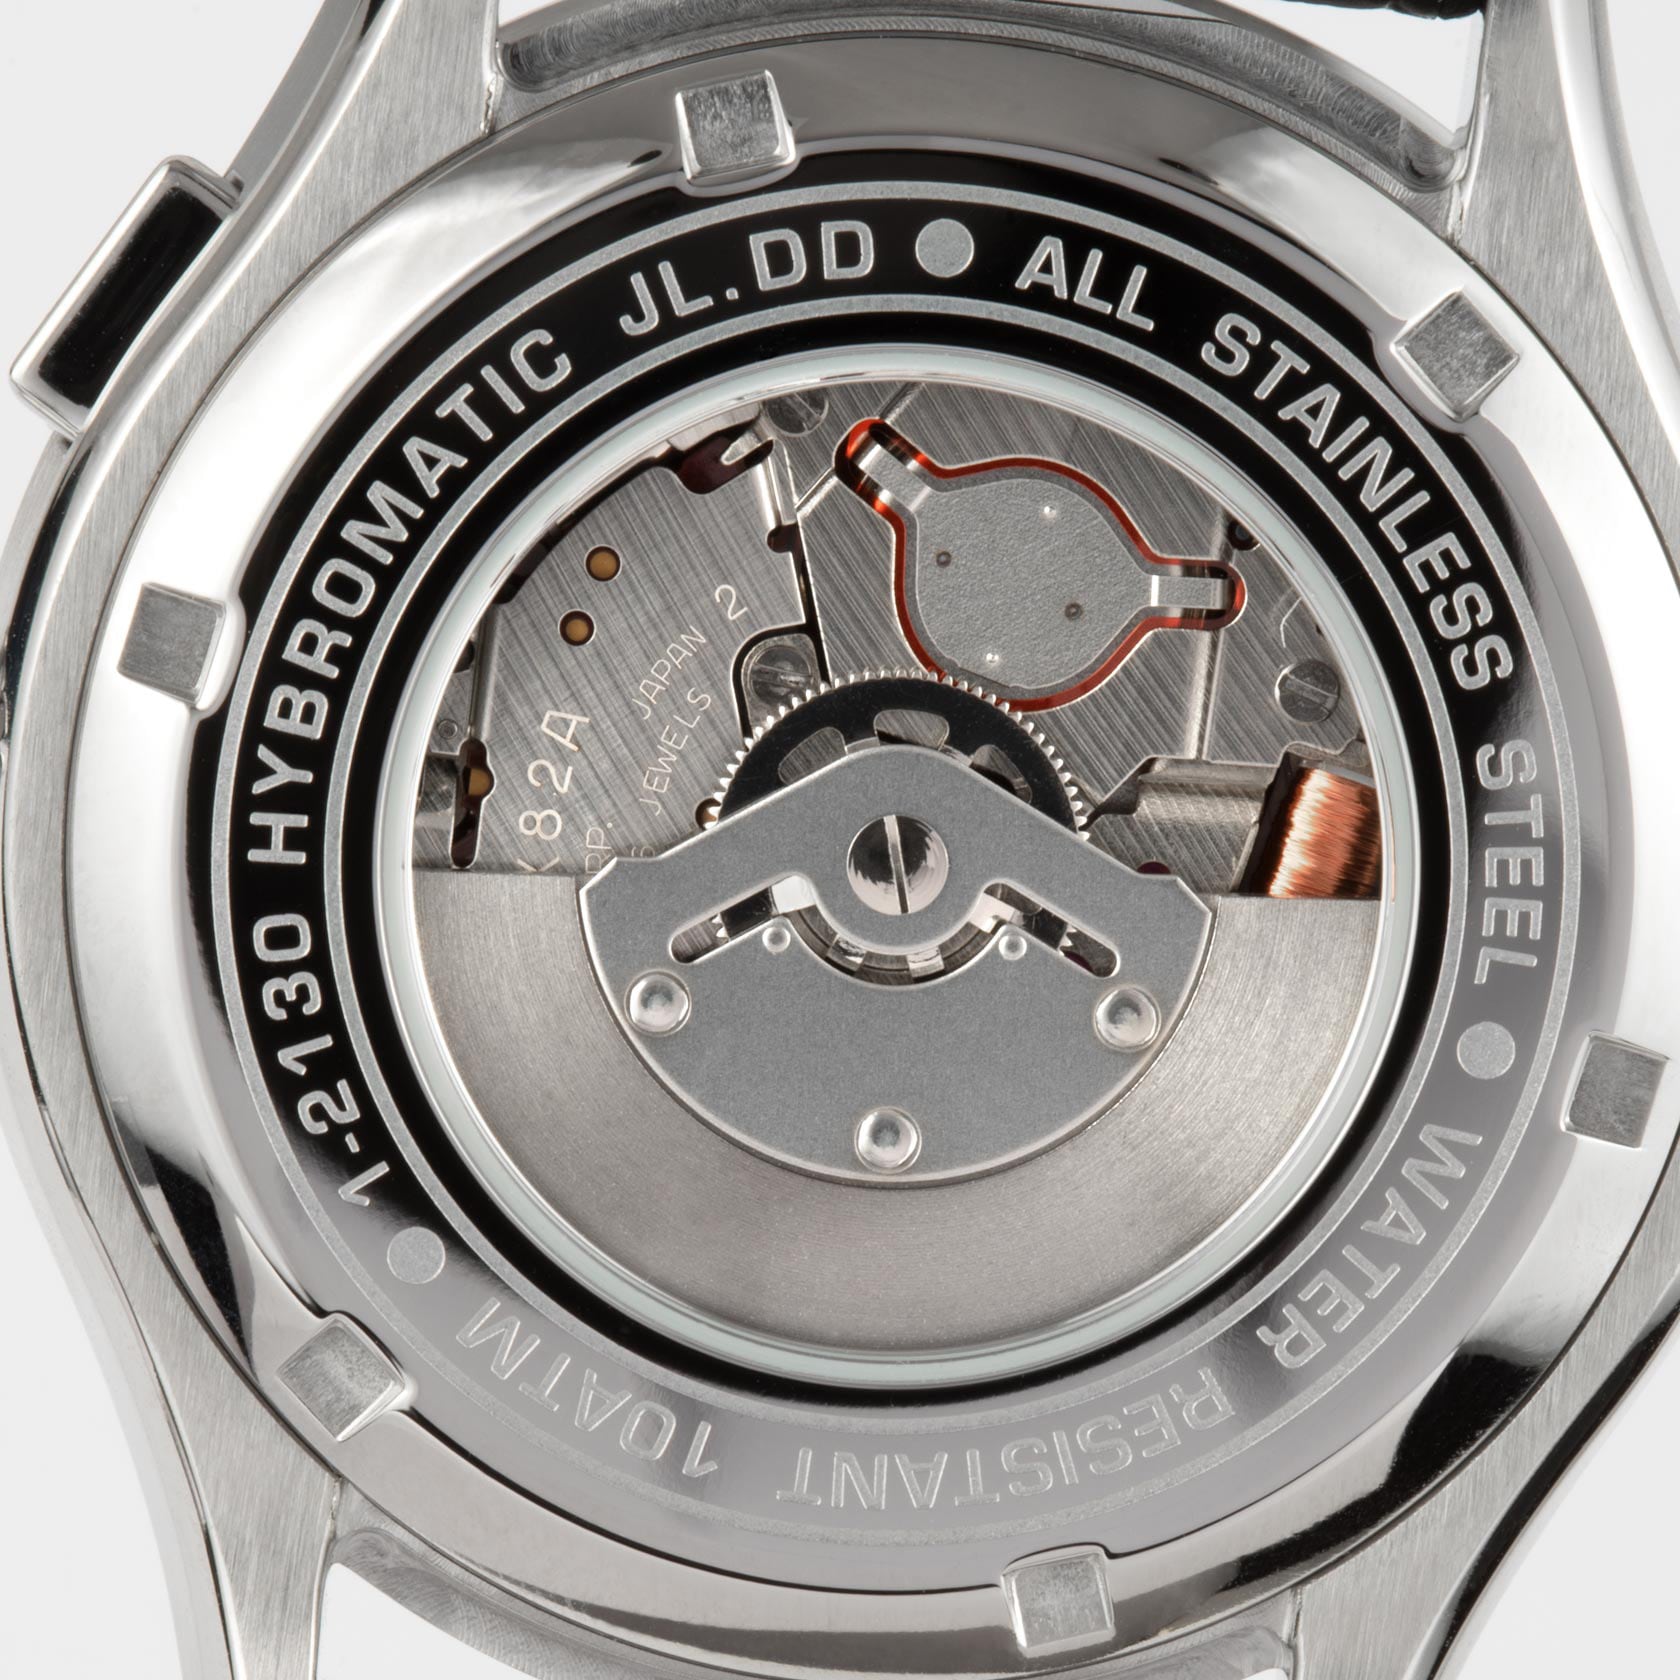 »Hybromatic, Jacques Lemans 1-2130A« online Kineticuhr bei UNIVERSAL